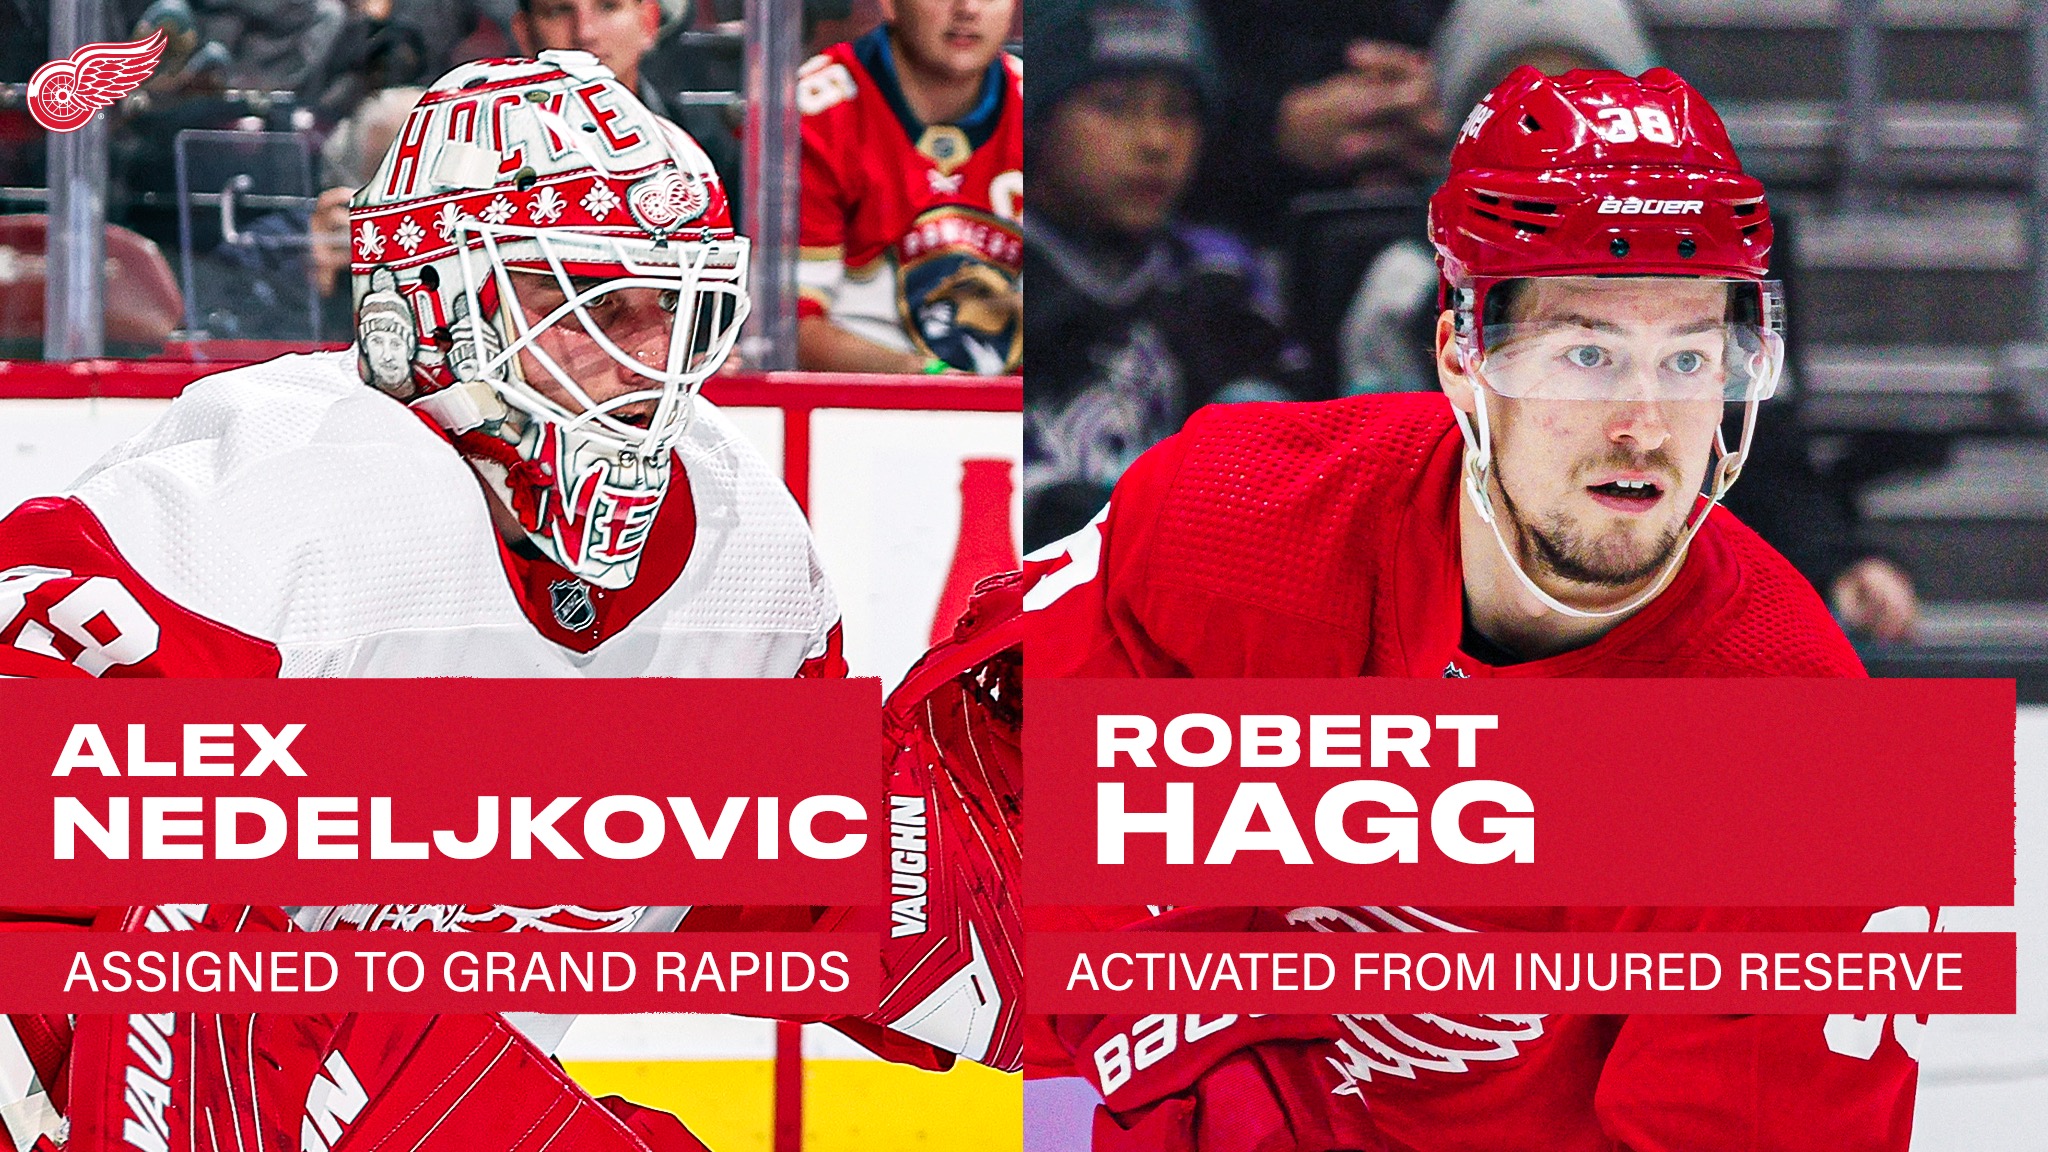 Detroit Red Wings on Twitter: "UPDATE: The #RedWings today assigned goaltender Alex Nedeljkovic to the AHL's Grand Rapids Griffins and activated defenseman Robert Hagg from injured reserve. 📰 » https://t.co/NHHGRqTtzo"